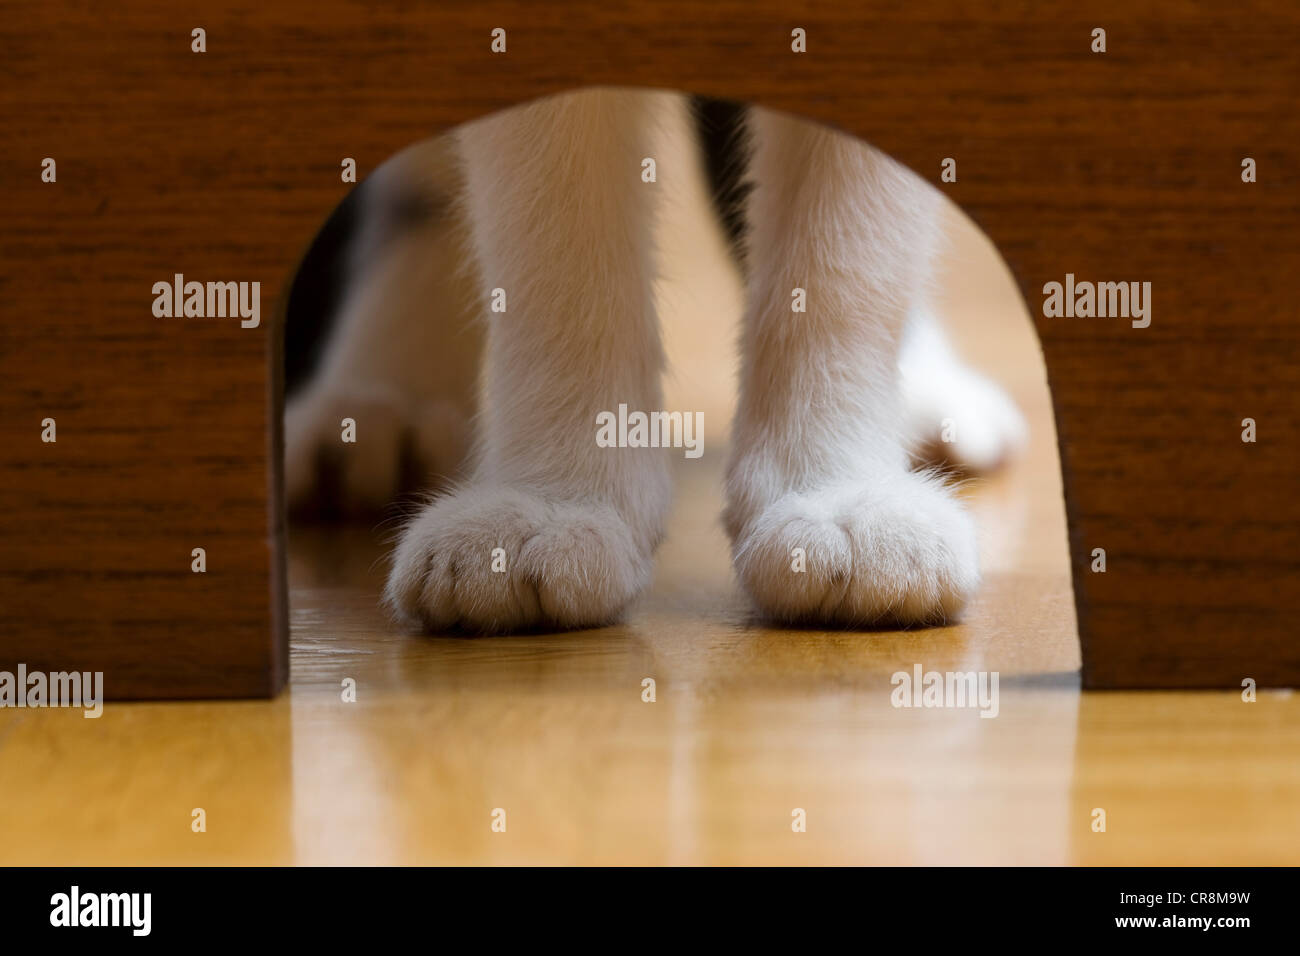 Cats Paws And Mouse Hole Stock Photo 48749397 Alamy